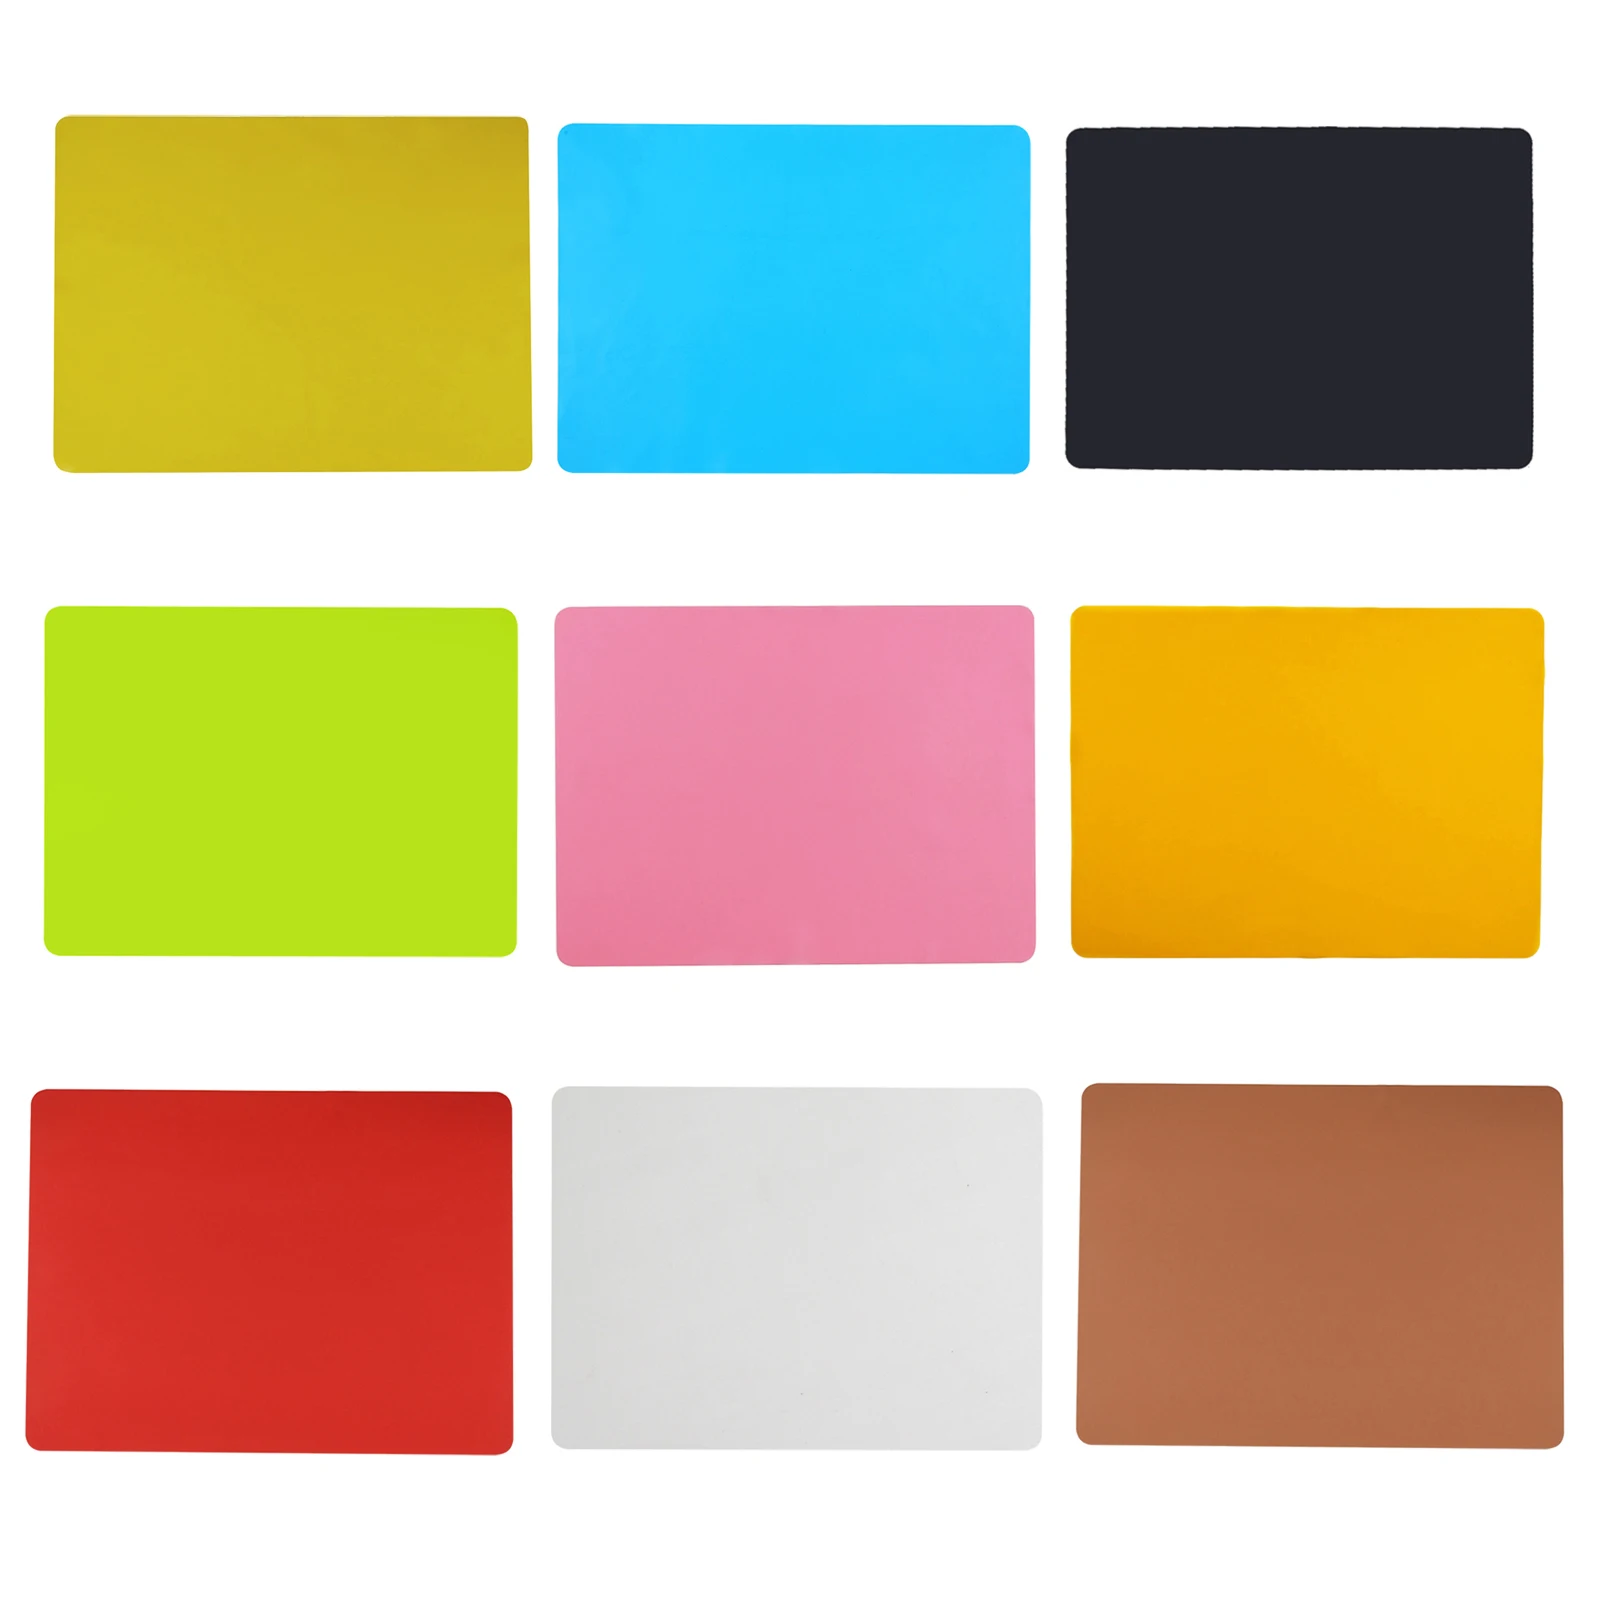 https://ae01.alicdn.com/kf/Sabf4ac7f1d7f4d2babe90940b1d661d6b/Extra-Large-Silicone-Mats-for-Countertop-Multipurpose-Mat-Counter-Table-Protector-Desk-Saver-Pad-Placemat-Non.jpg